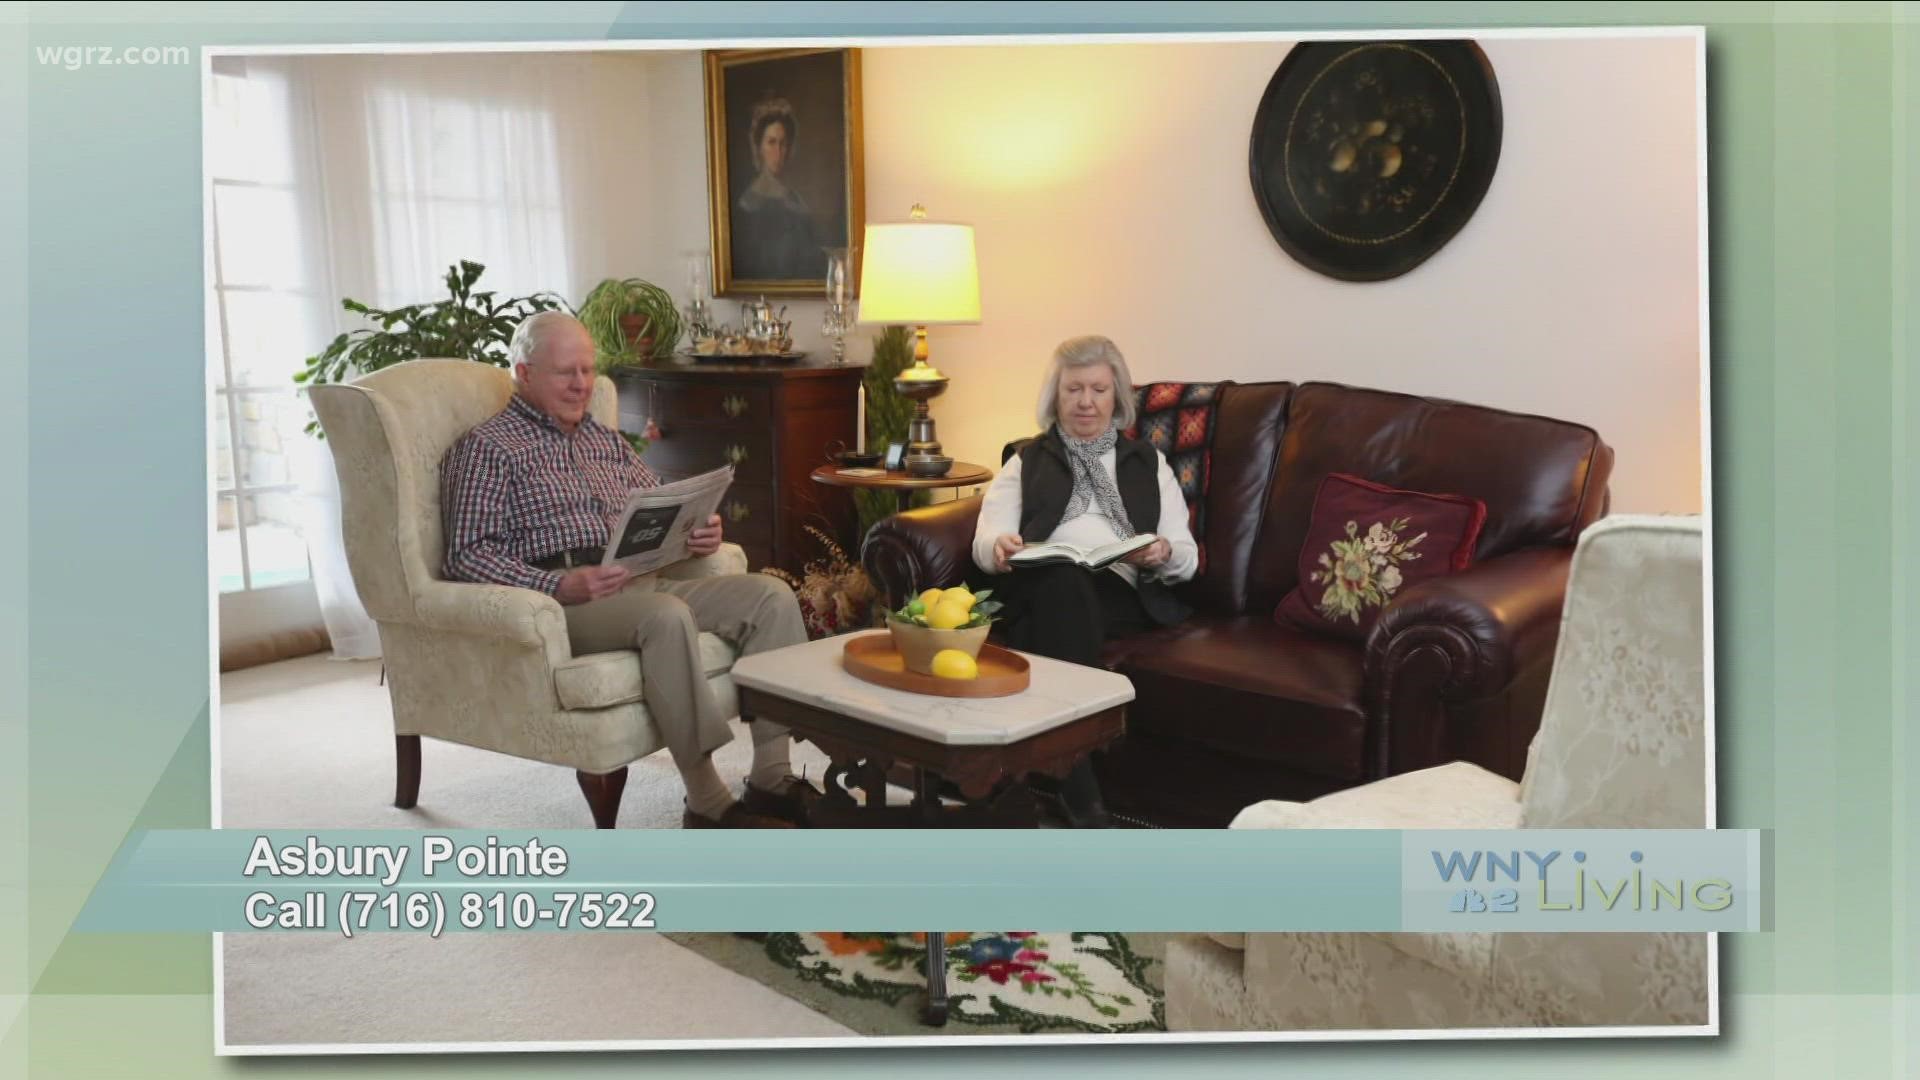 WNY Living - October 16 - Beechwood Continuing Care (THIS VIDEO IS SPONSORED BY BEECHWOOD CONTINUING CARE)